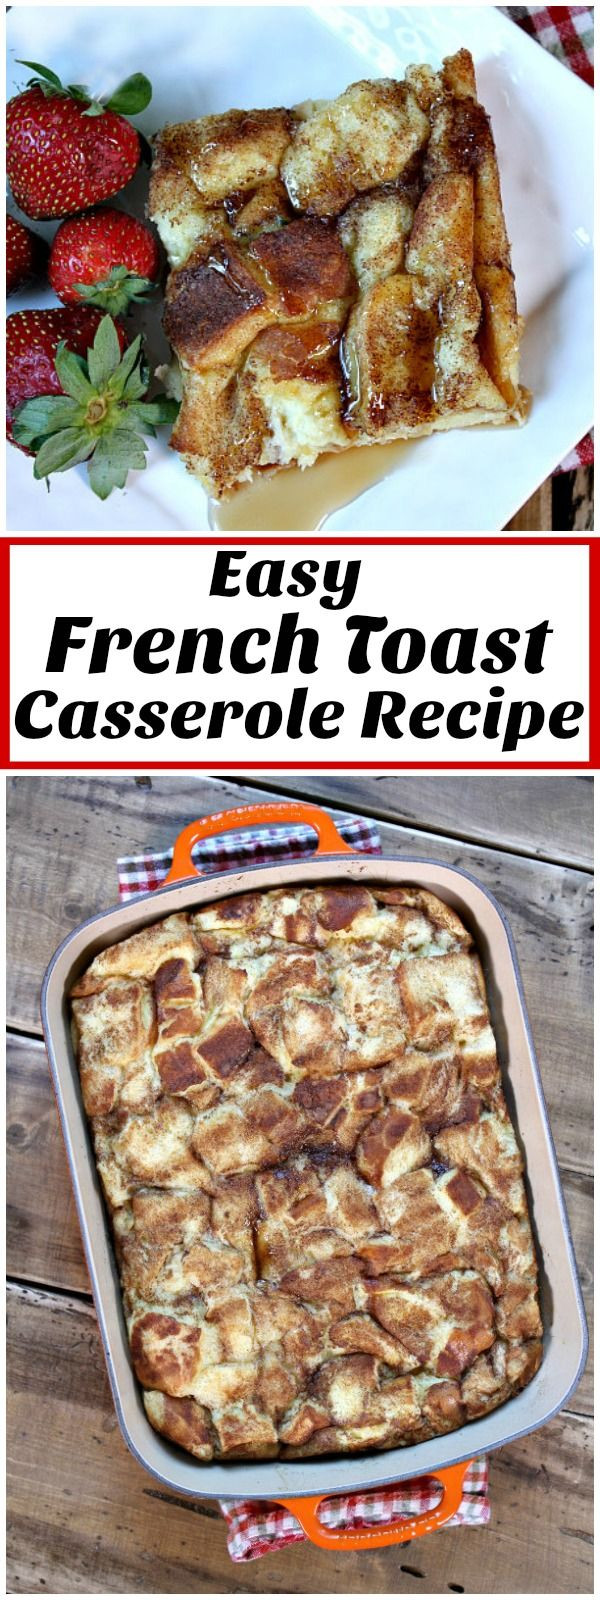 French Breakfast Recipes
 17 Best ideas about French Toast Casserole on Pinterest